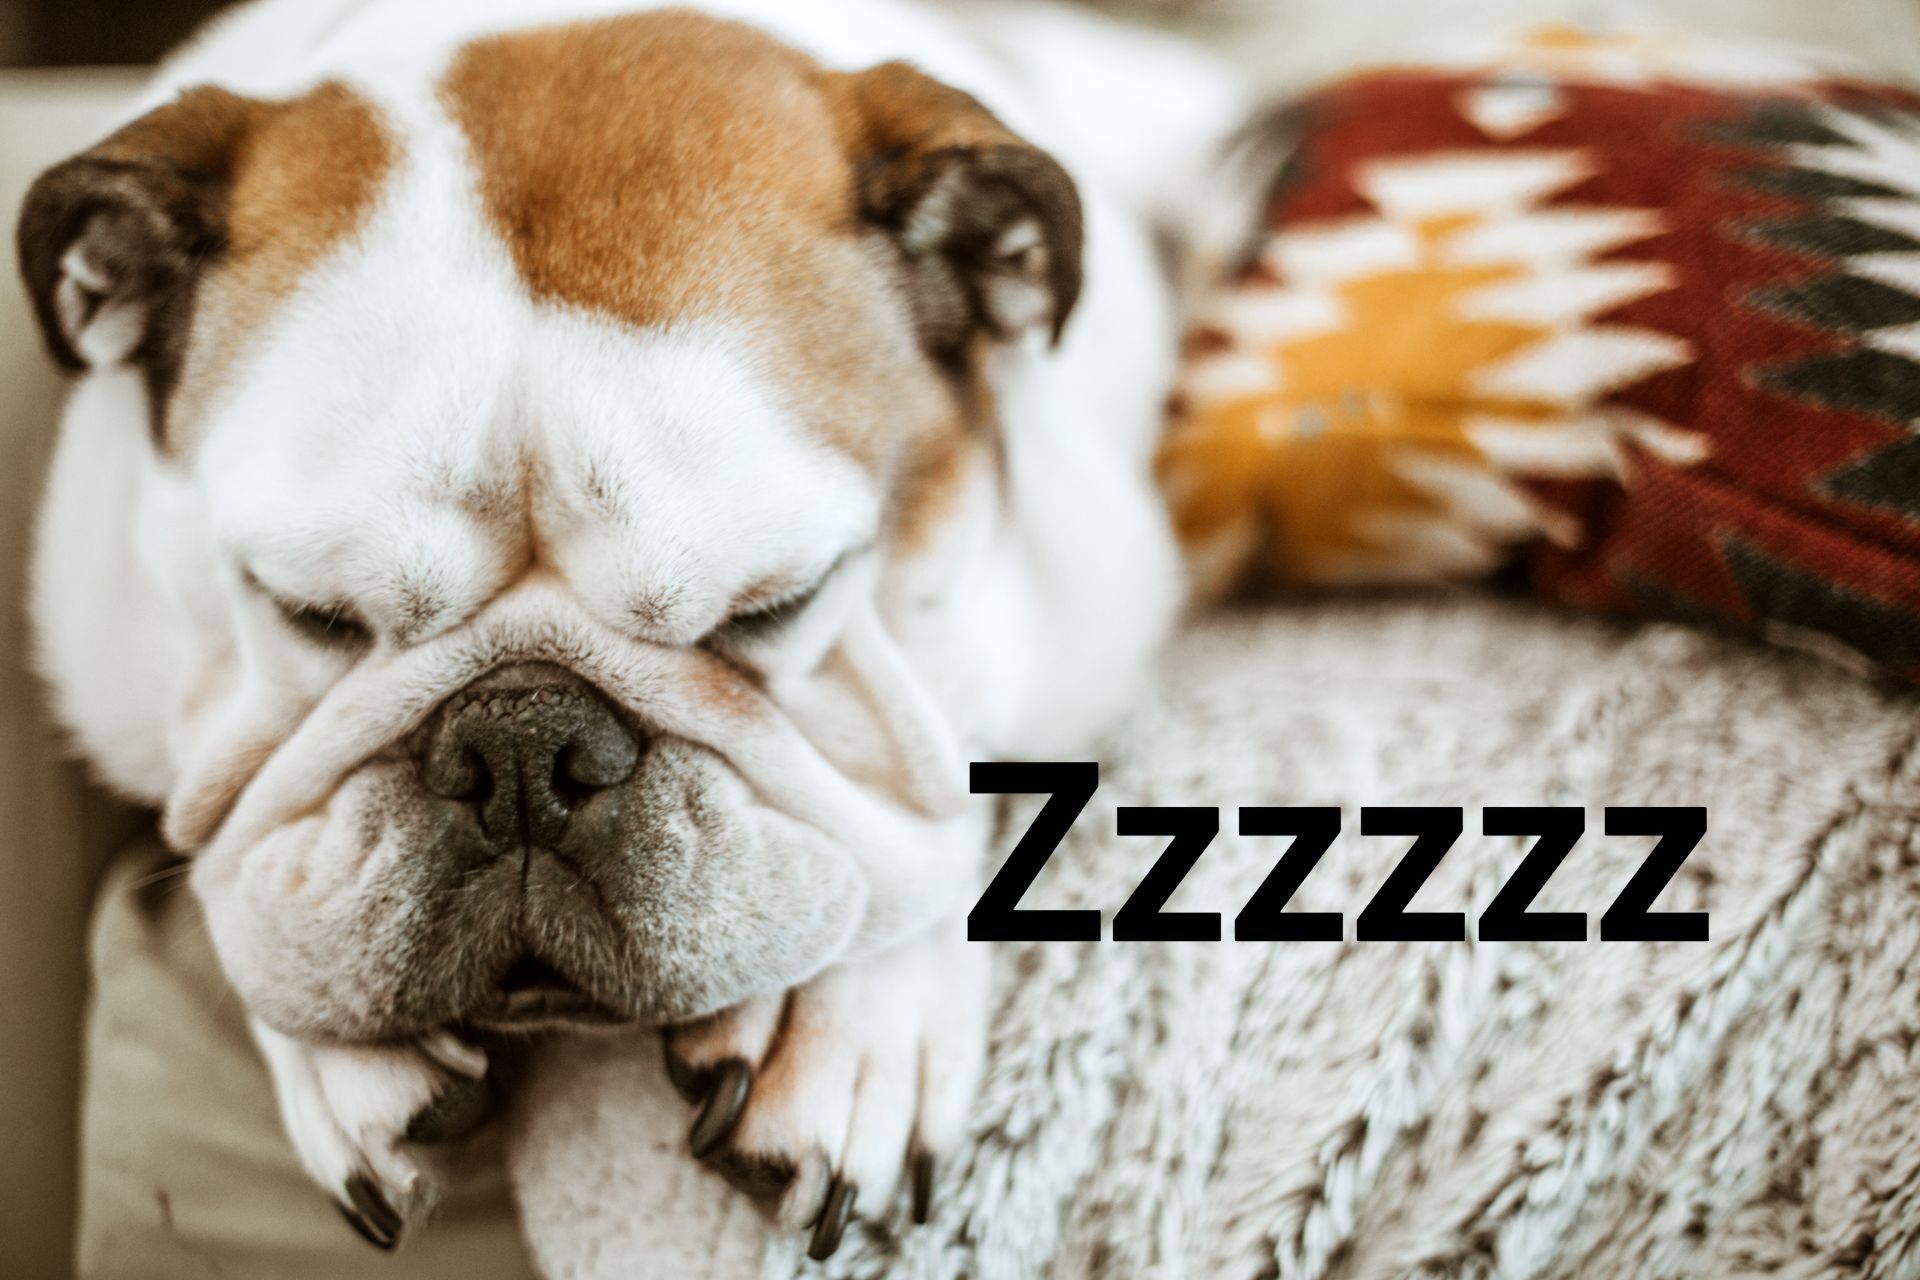 Bulldog Snoring - Indianapolis, IN - Sleep Better Indy